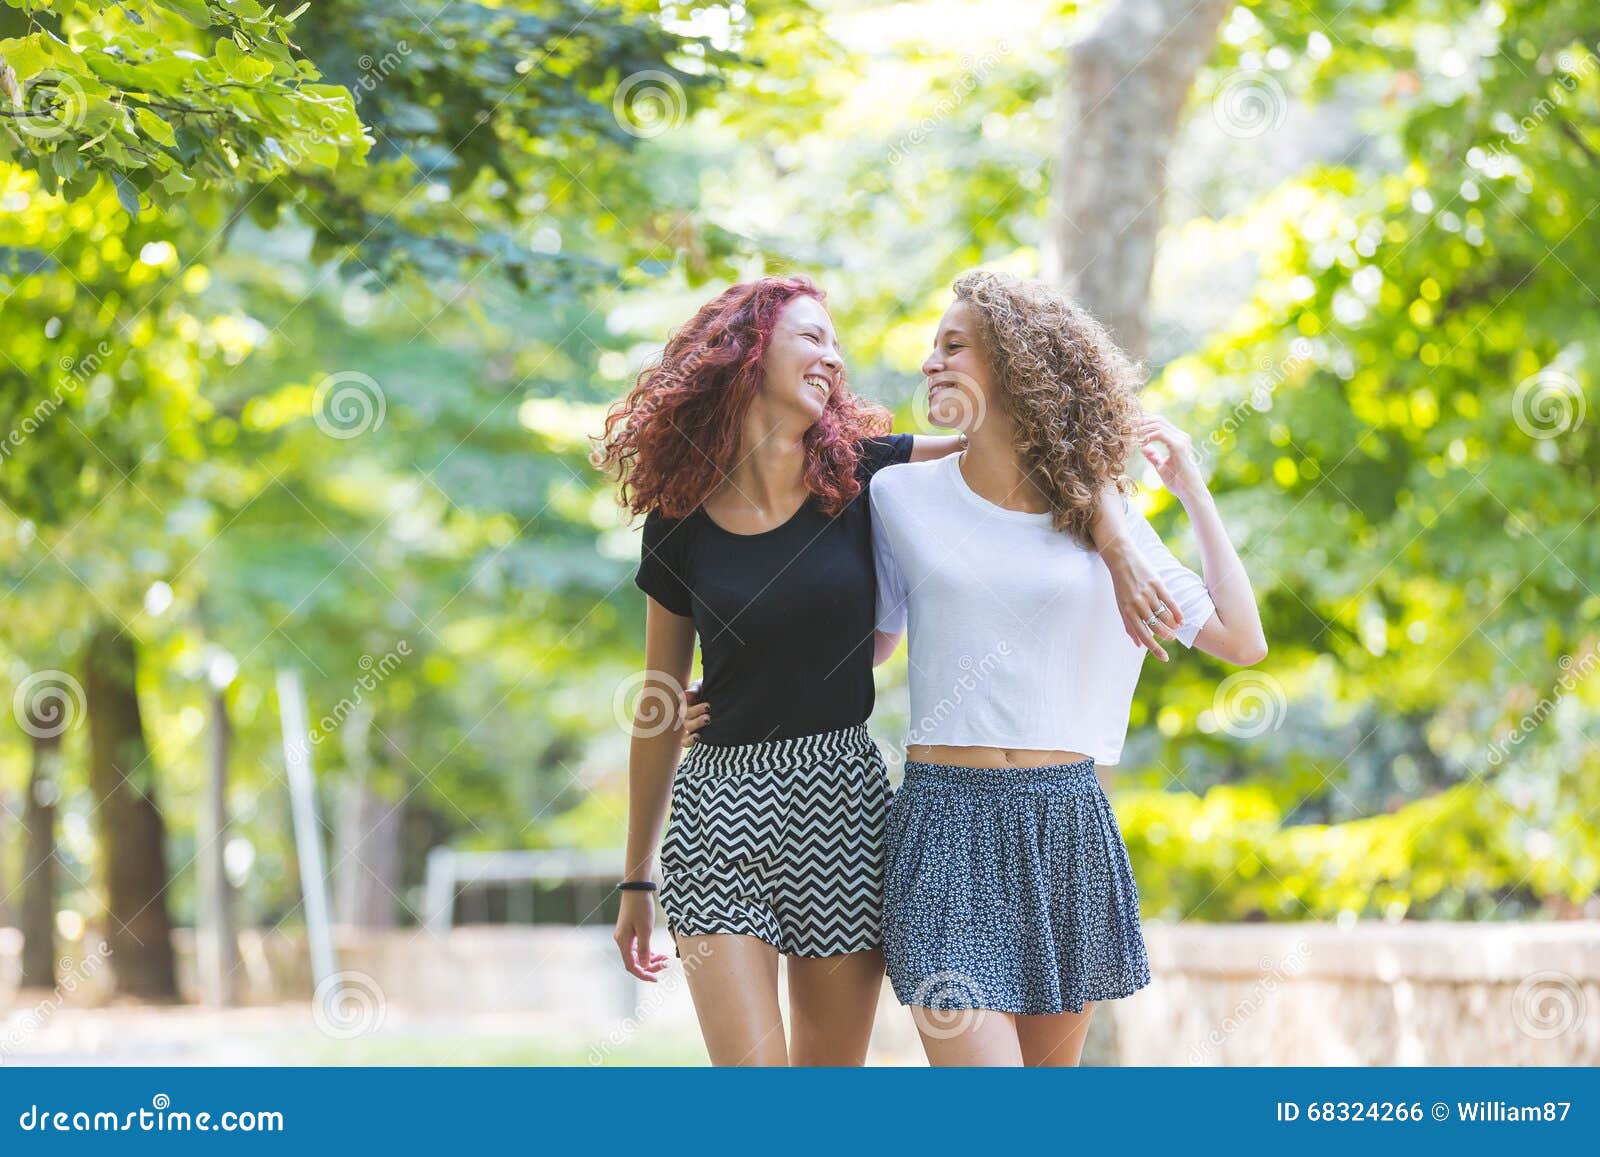 Two Girls Walking Embraced At Park Stock Photo Image Of Friends